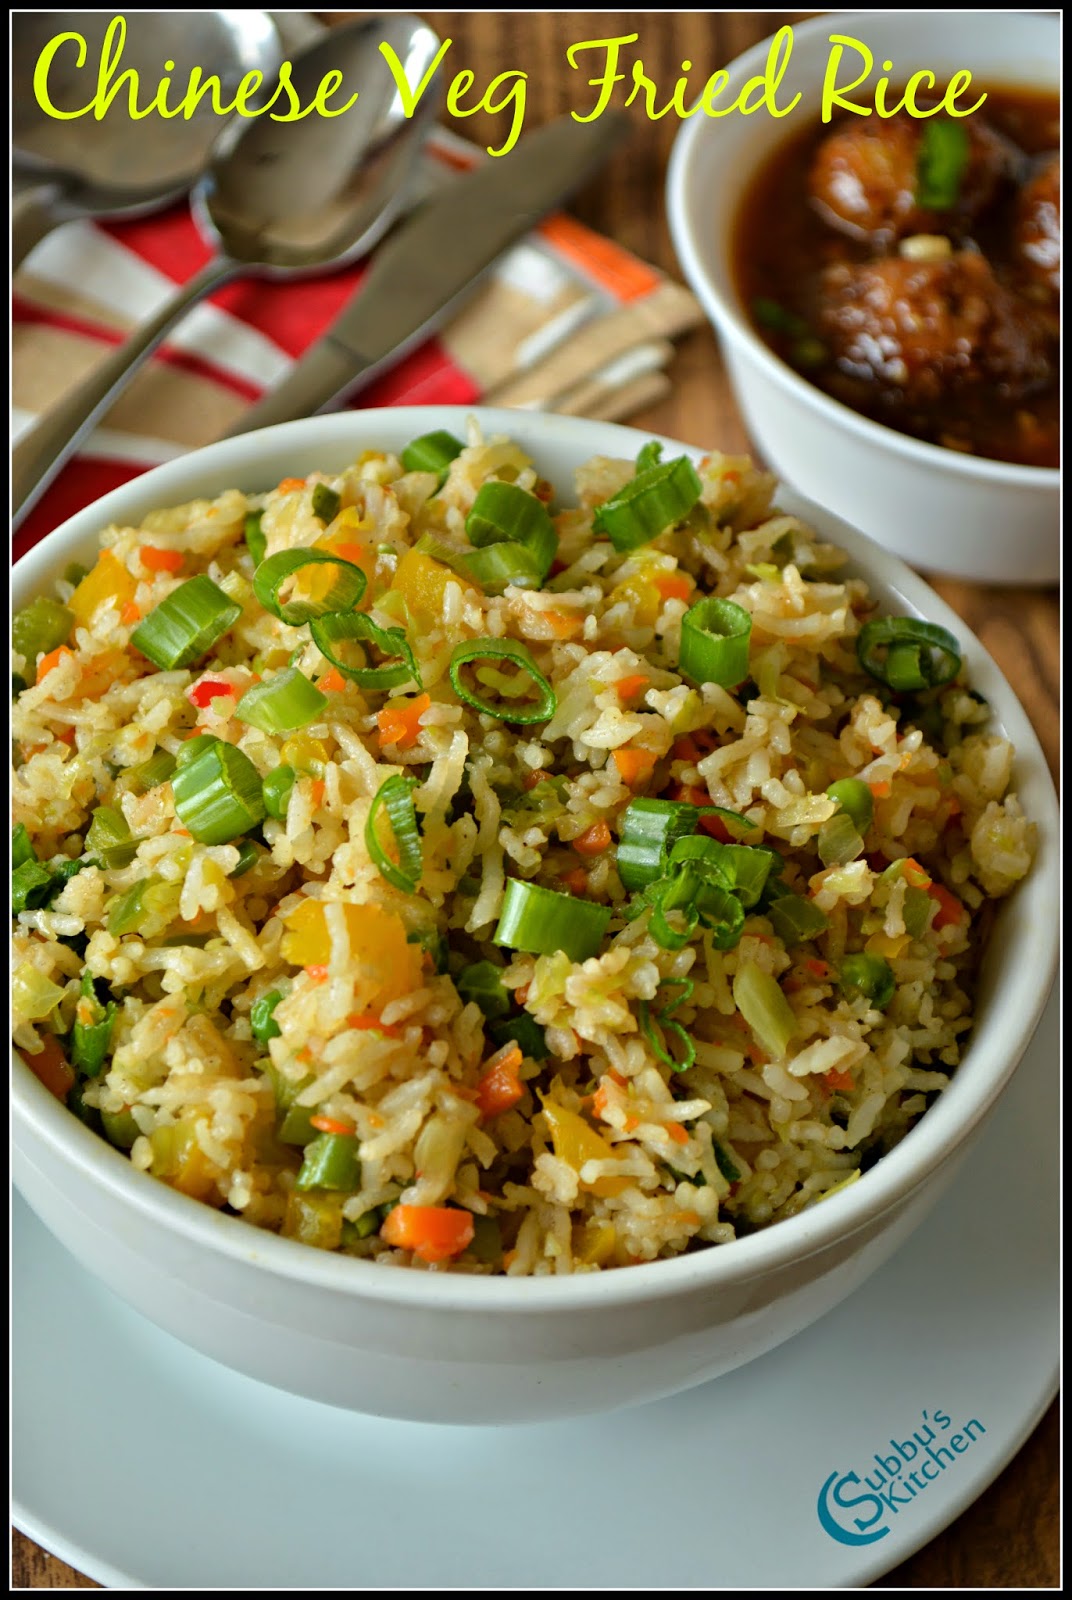 Chinese Vegetable Fried Rice Recipe - Subbus Kitchen